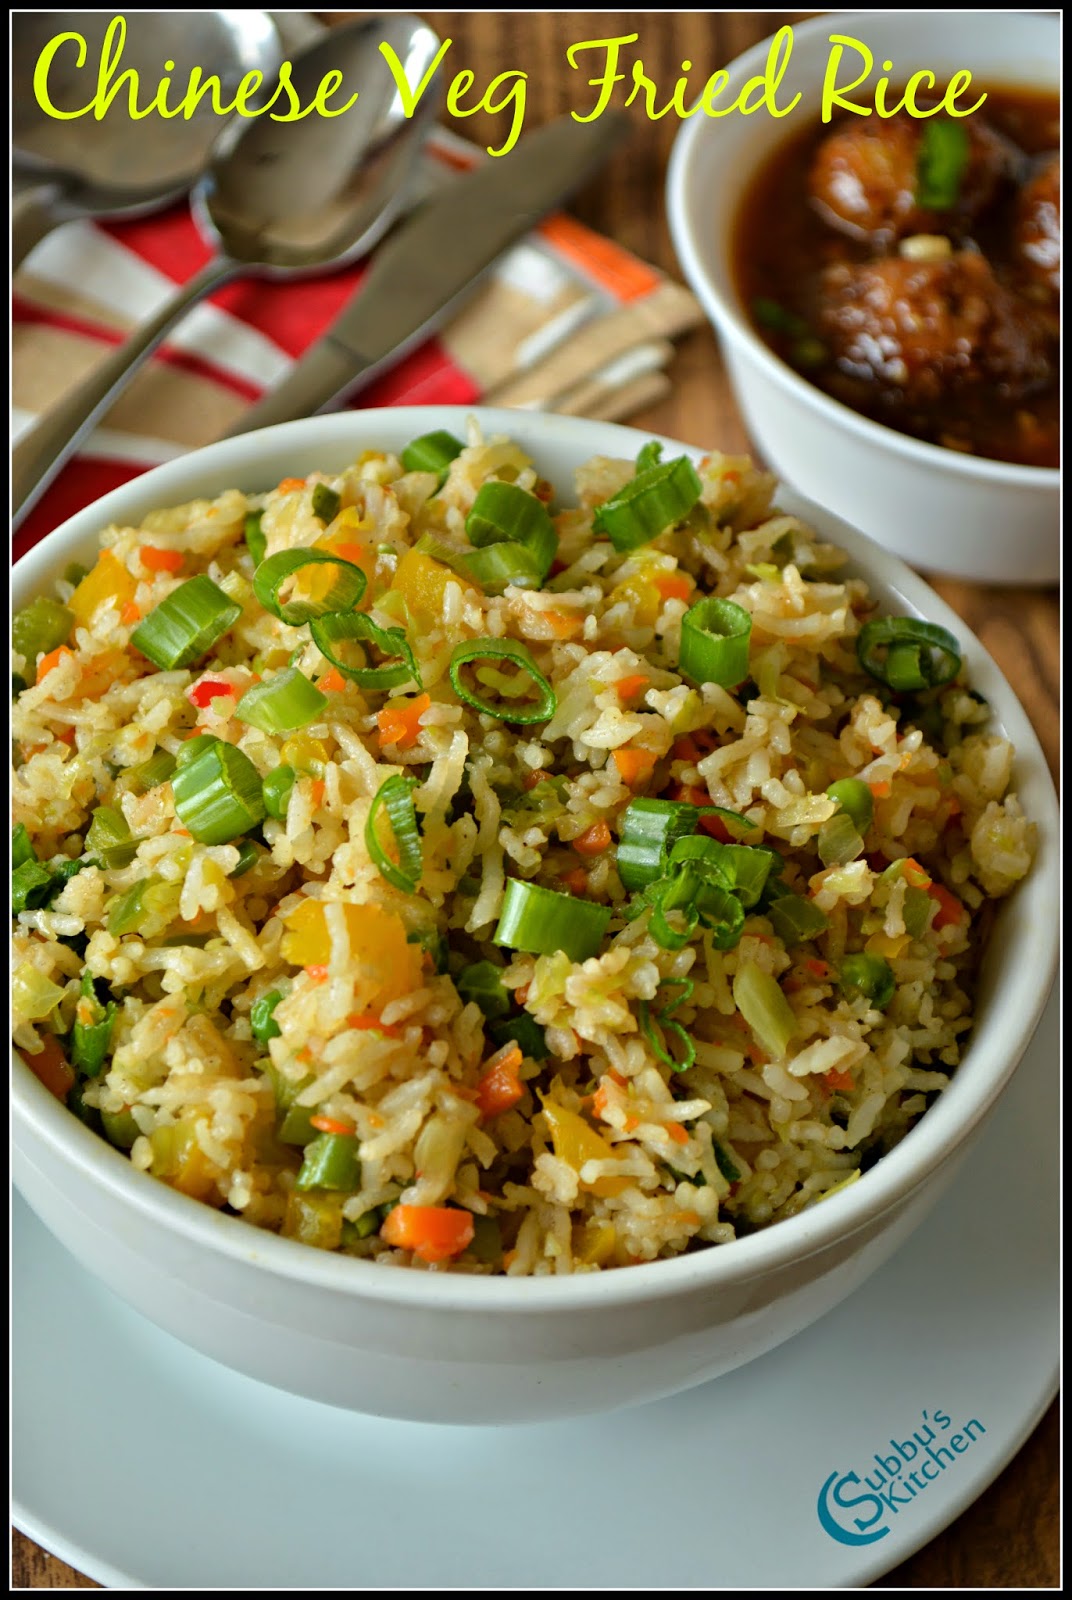 Chinese Vegetable Fried Rice Recipe - Subbus Kitchen